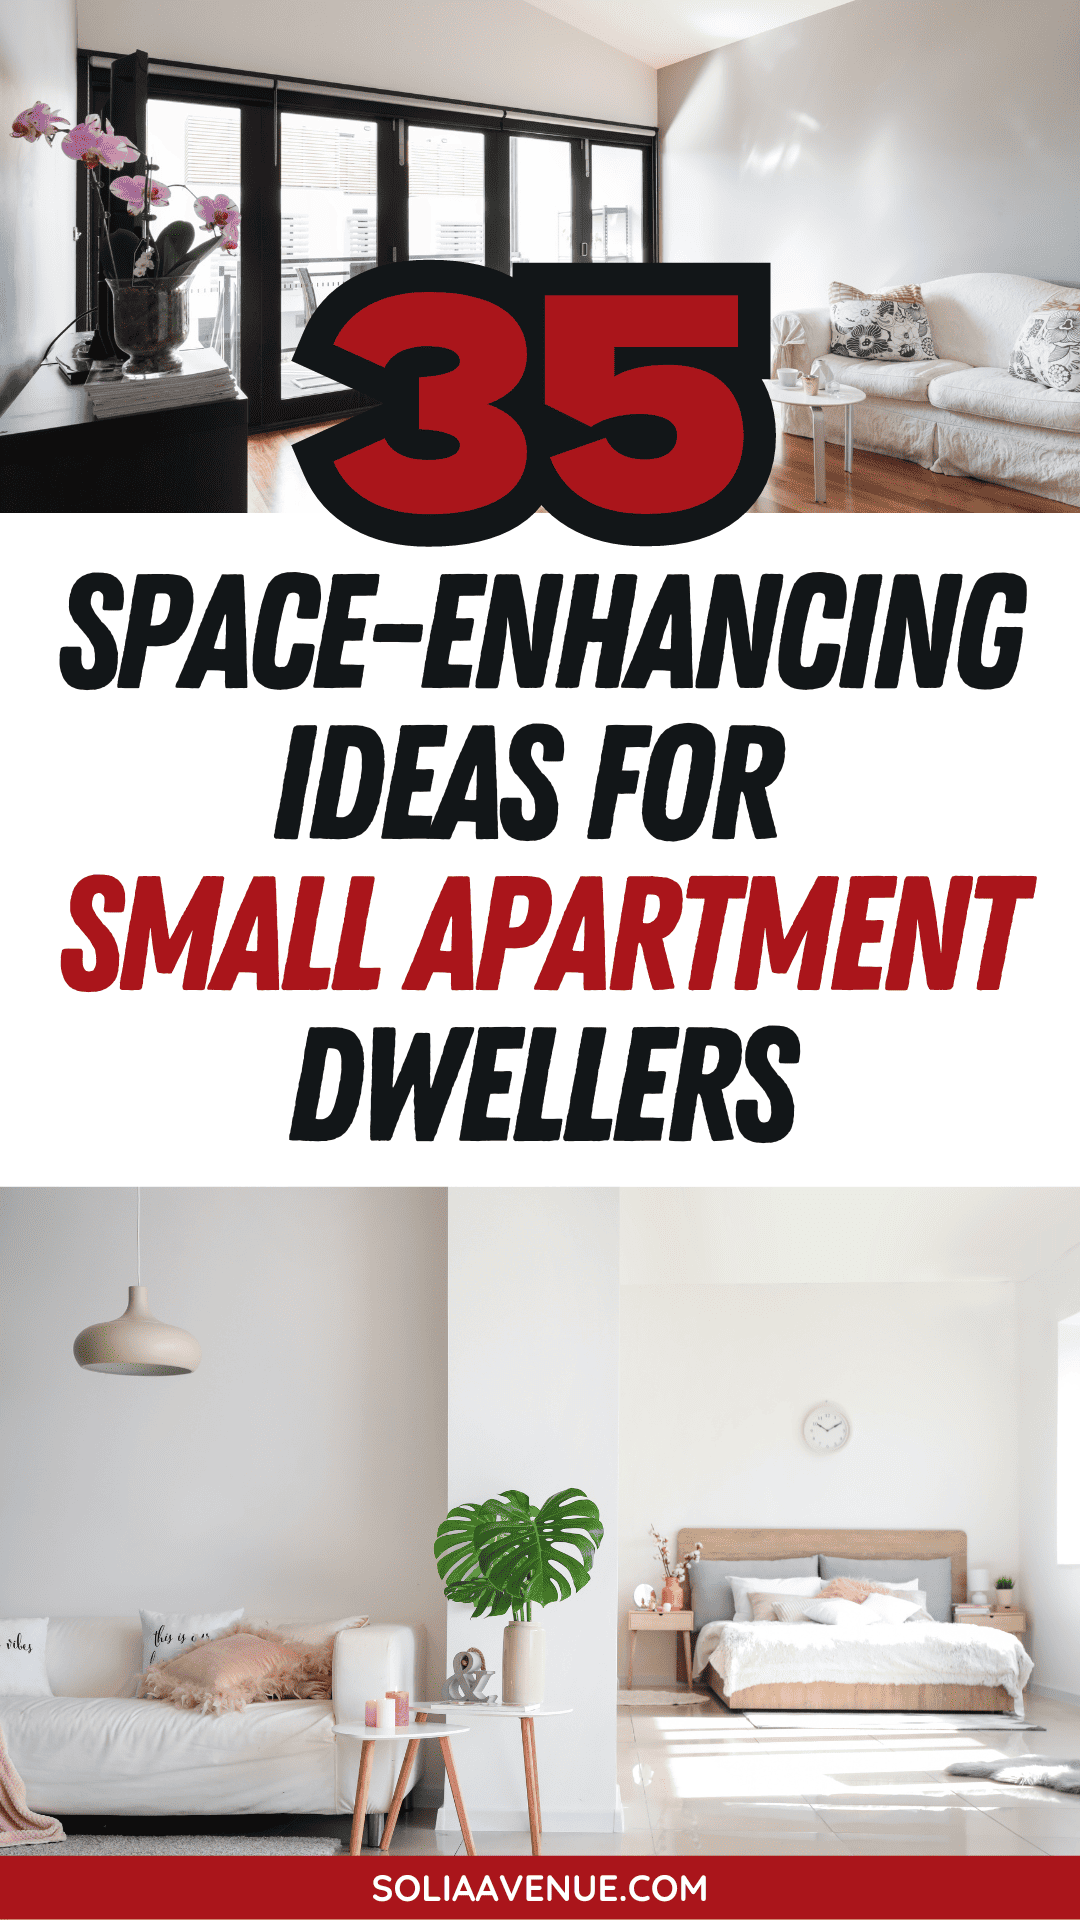 Don't let limited space limit your creativity. Explore budget-friendly small apartment ideas space-saving for a functional kitchen and a cozy bedroom that mirror your small apartment ideas aesthetic. Make every nook and cranny count and transform your small apartment into a space that truly speaks to you.